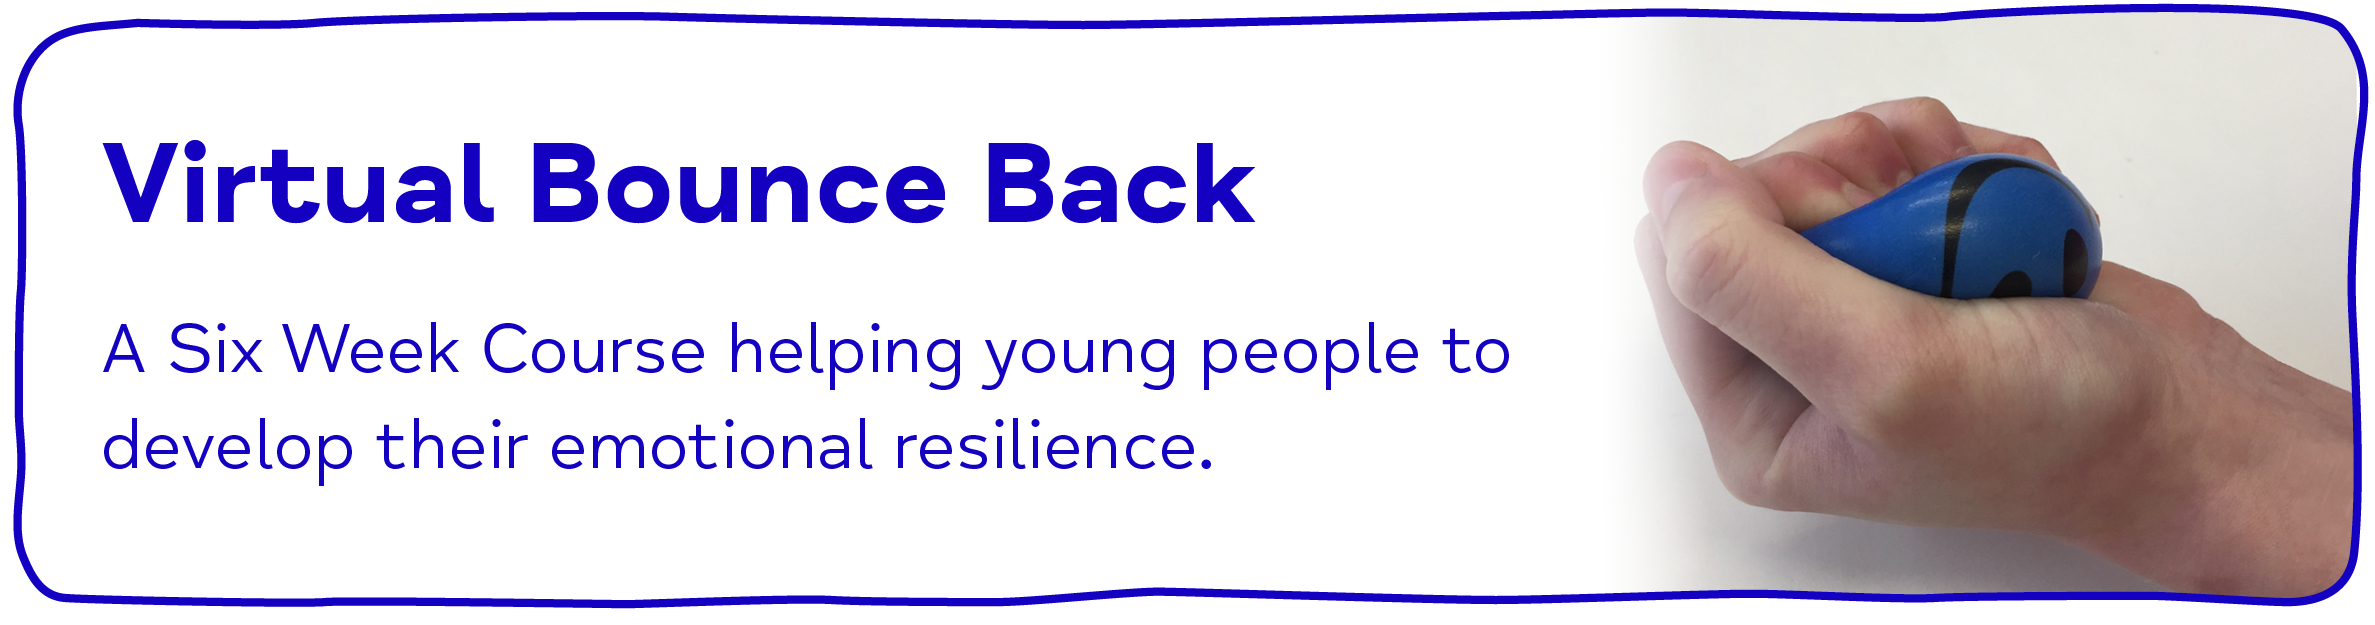 Virtual Bounce Back - A Six Week Course helping young people to develop their emotional resilience.